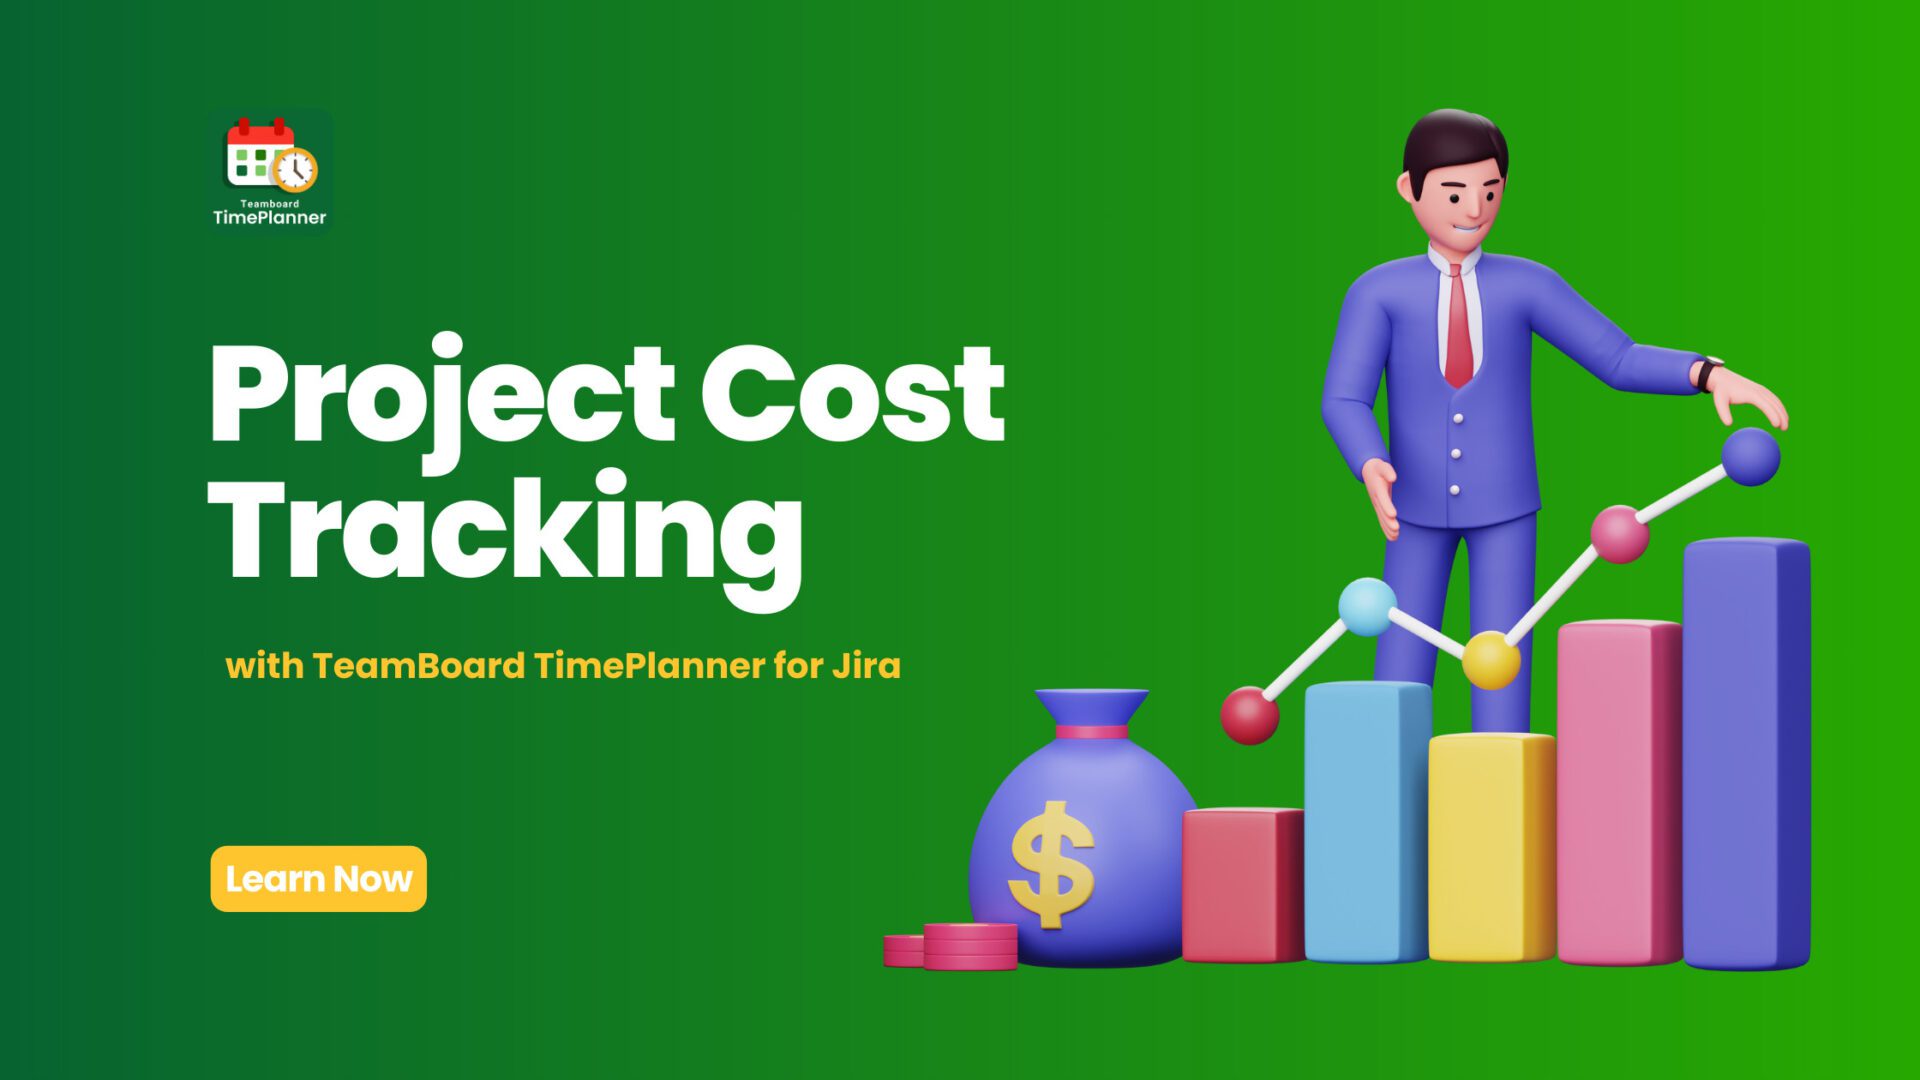 Project cost tracking